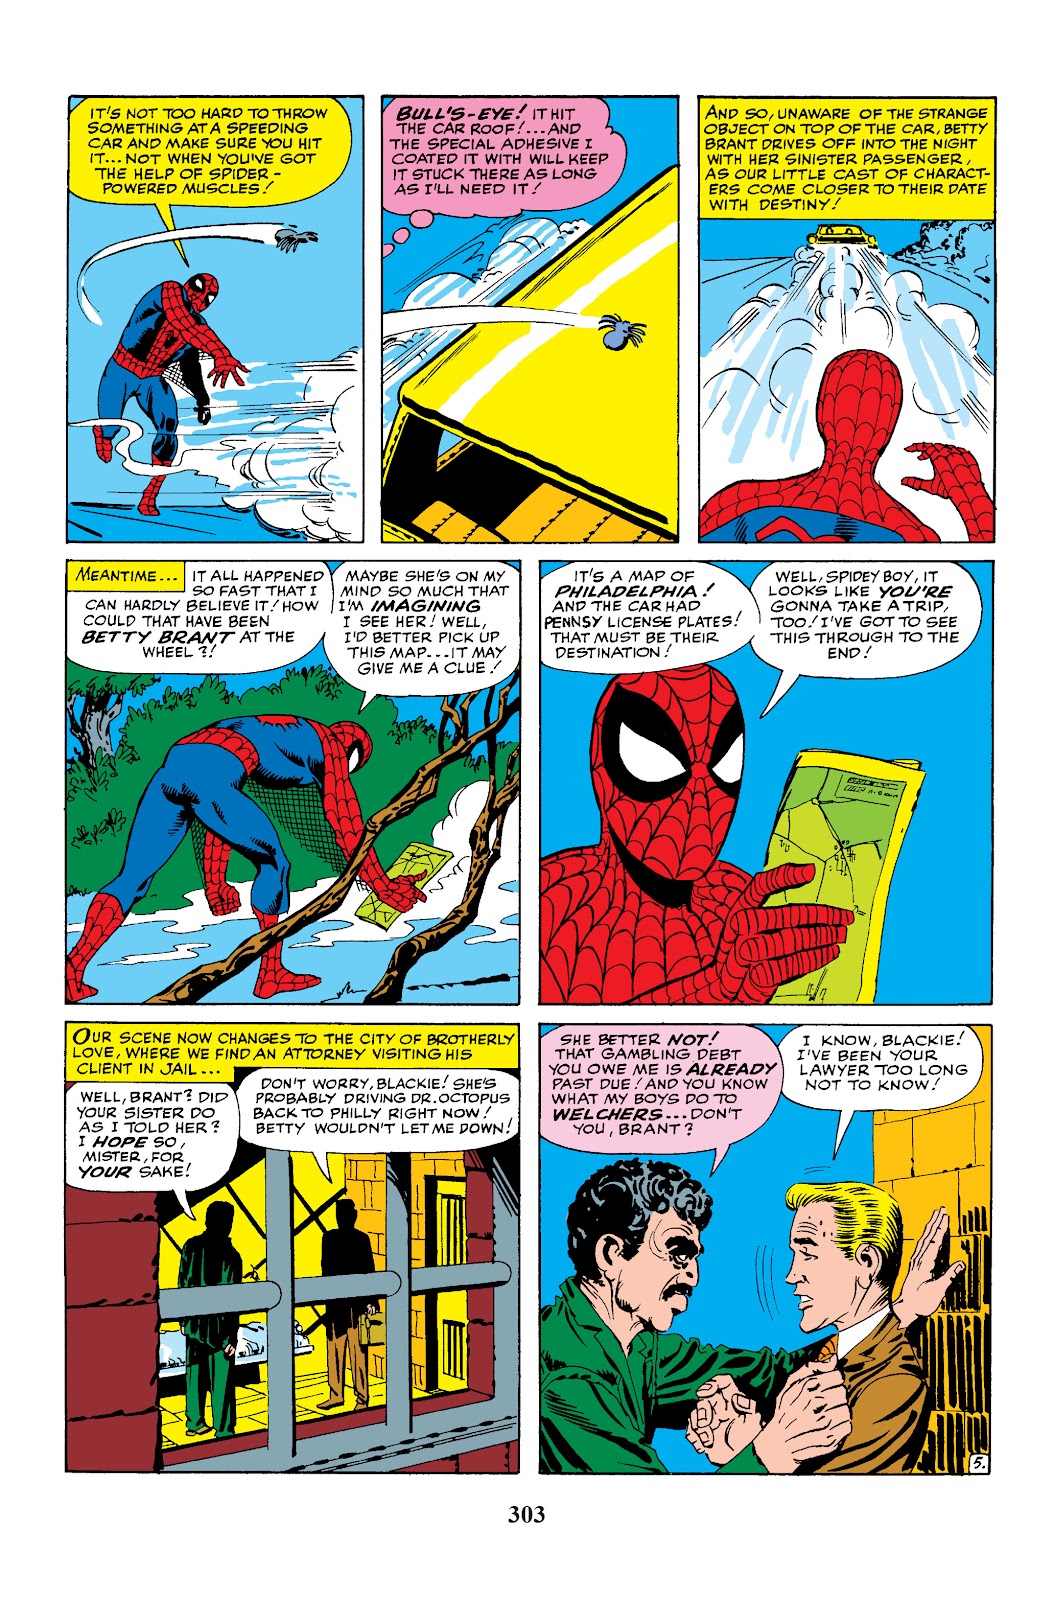 The Amazing Spider-Man (1963) #11, Comic Issues